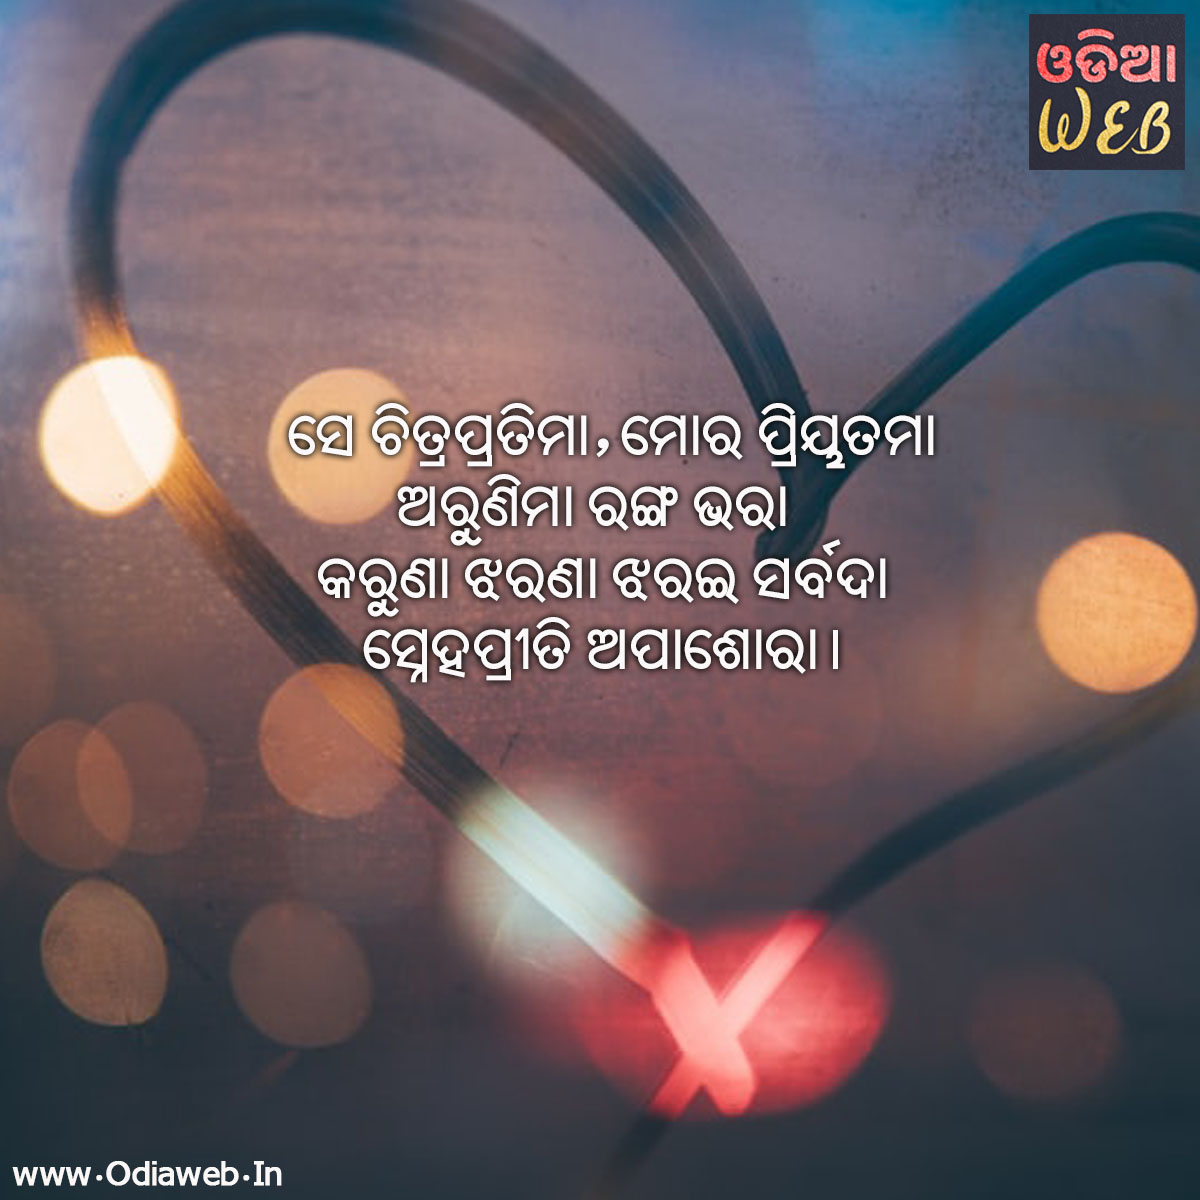 Odia Sms For Lovers